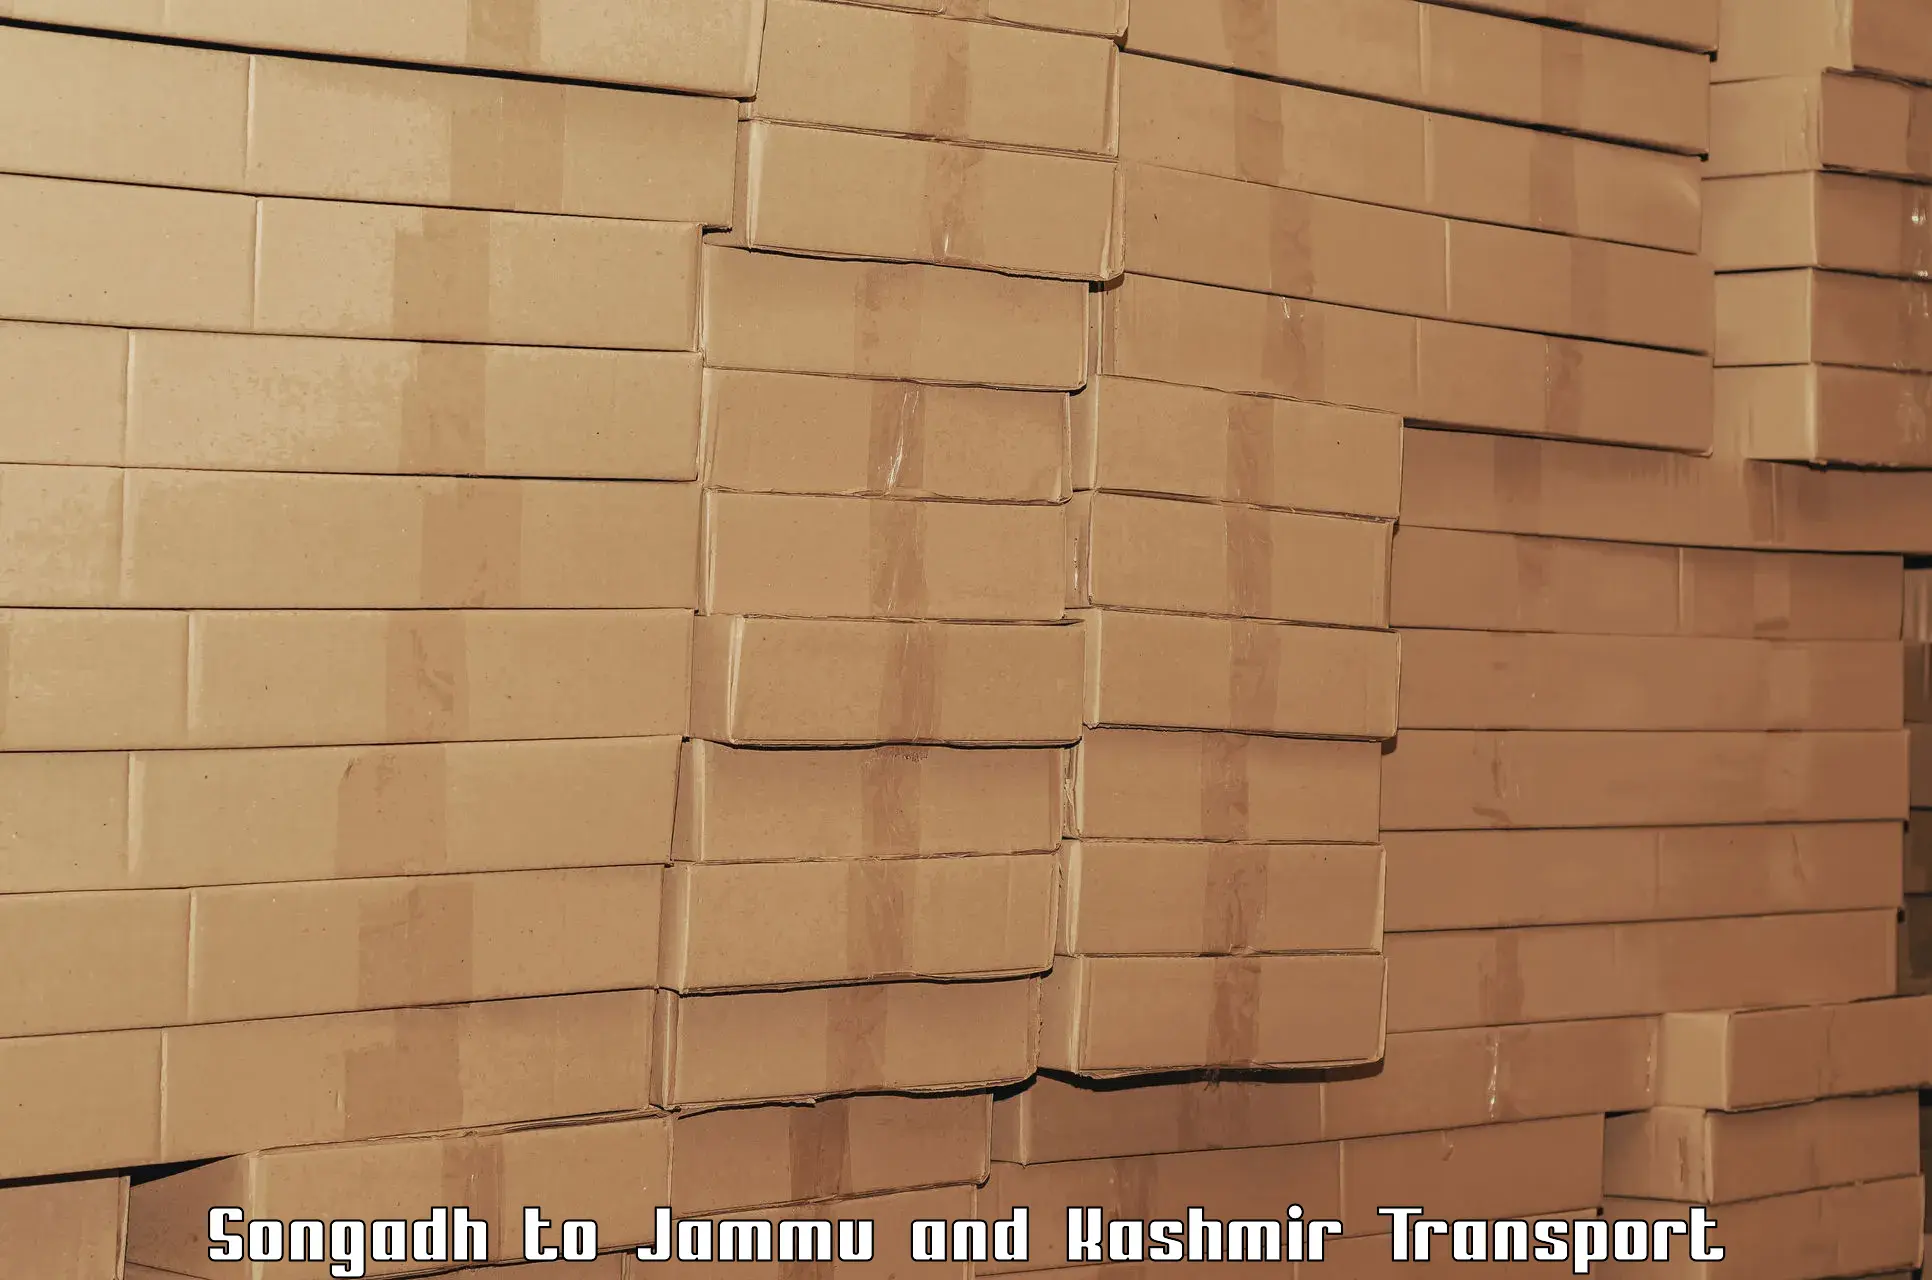 Intercity goods transport in Songadh to Jammu and Kashmir